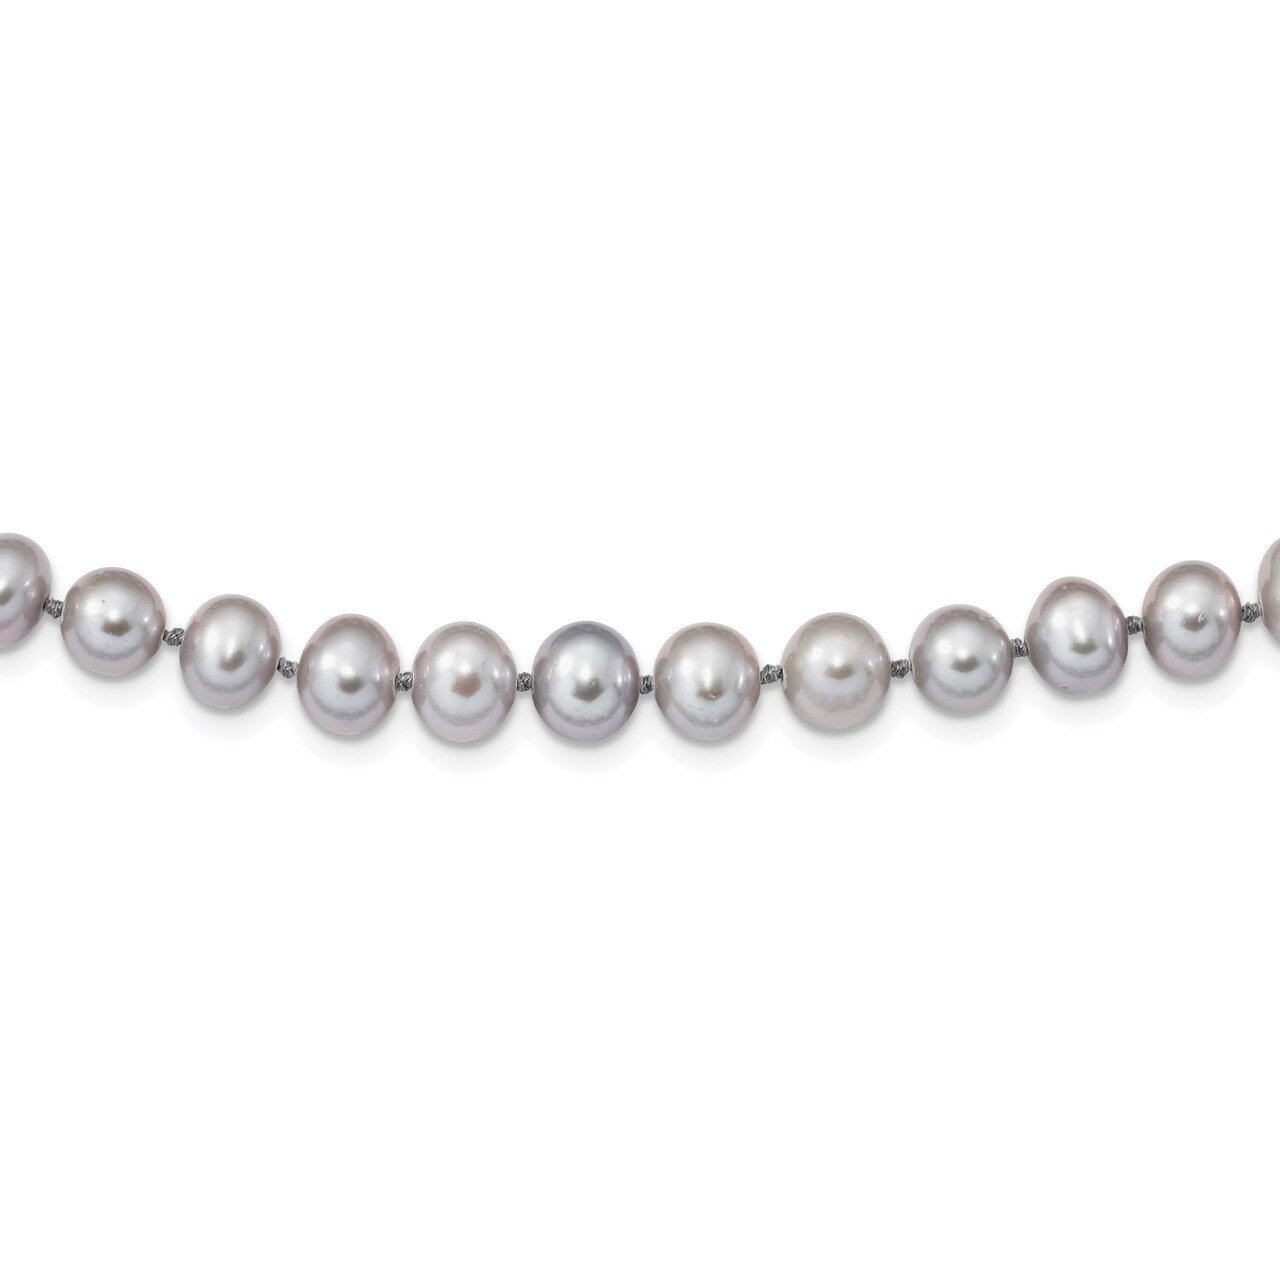 7-8mm Grey Cultured Freshwater Pearl Necklace 18 Inch Sterling Silver Rhodium QH5162-18